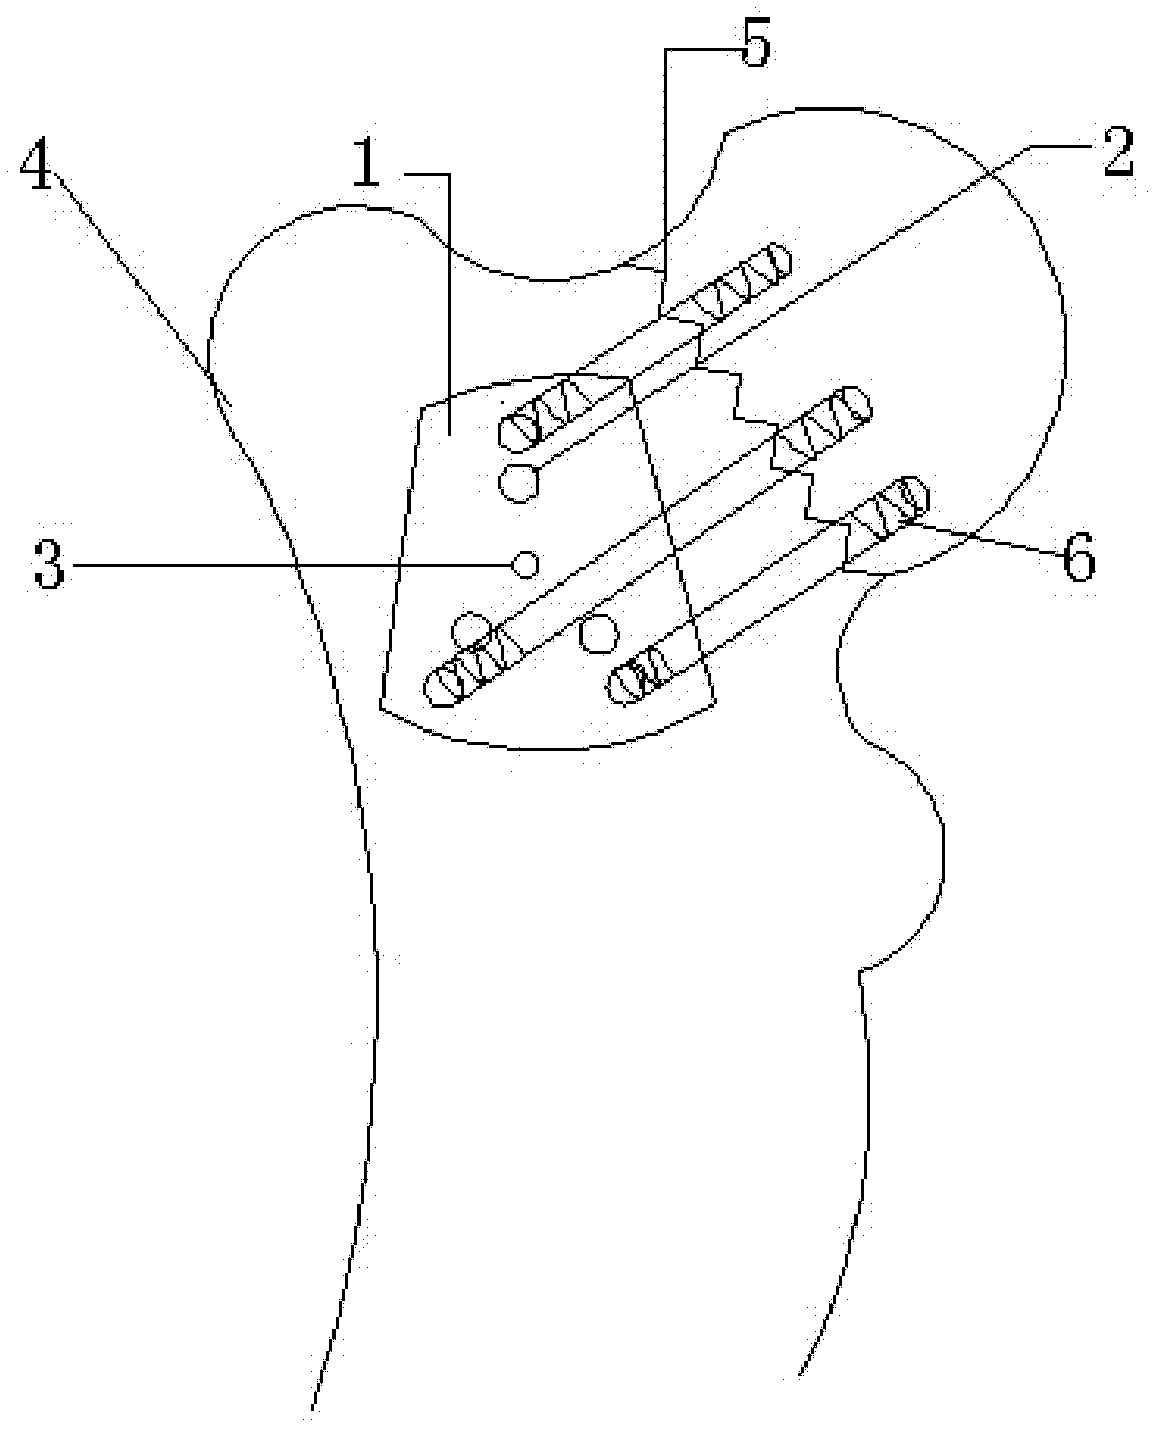 Trapezoid locking steel plate with radian for treating femoral neck fracture